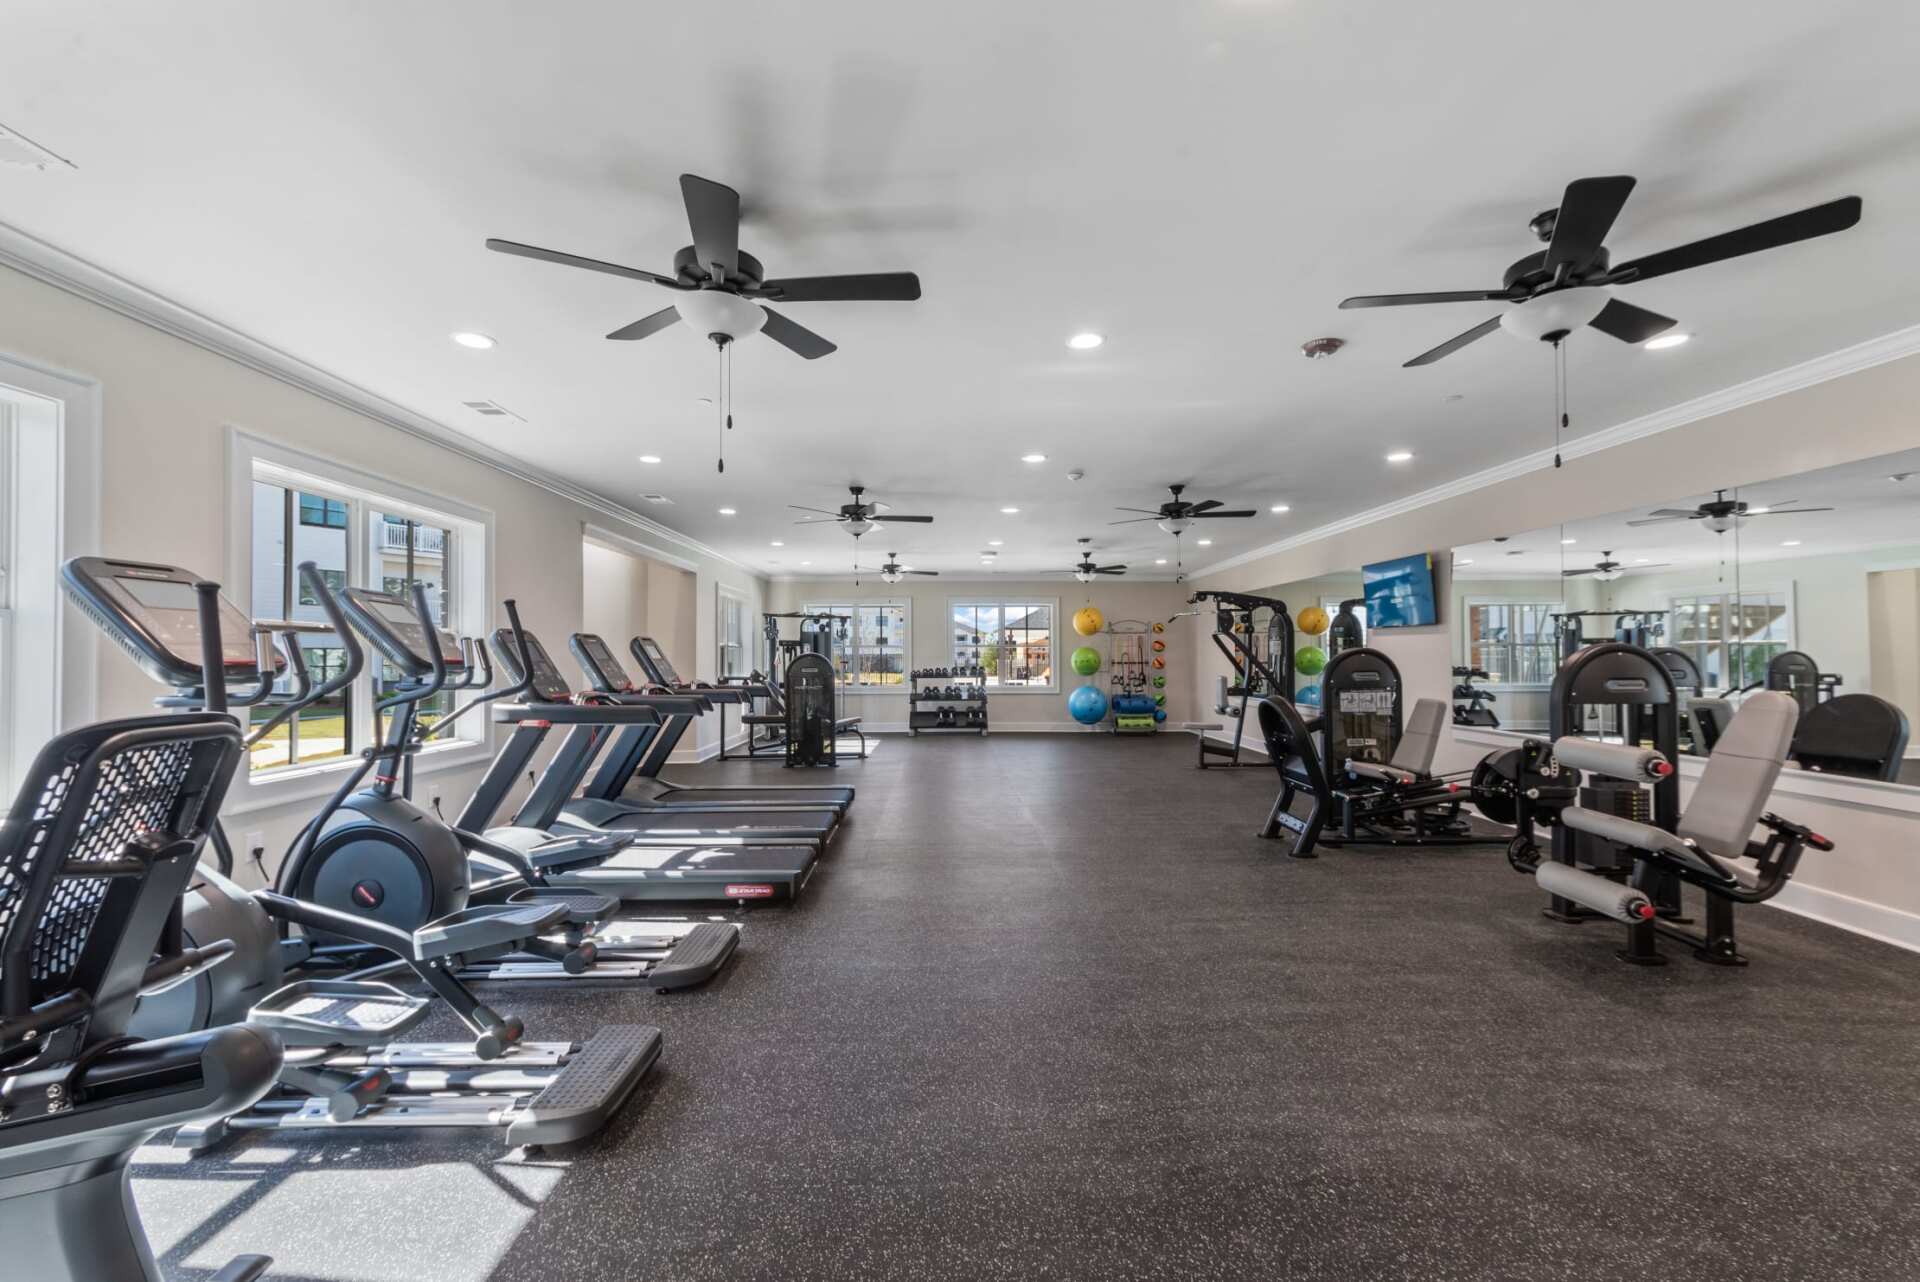 The Blakely apartment spacious fitness center.